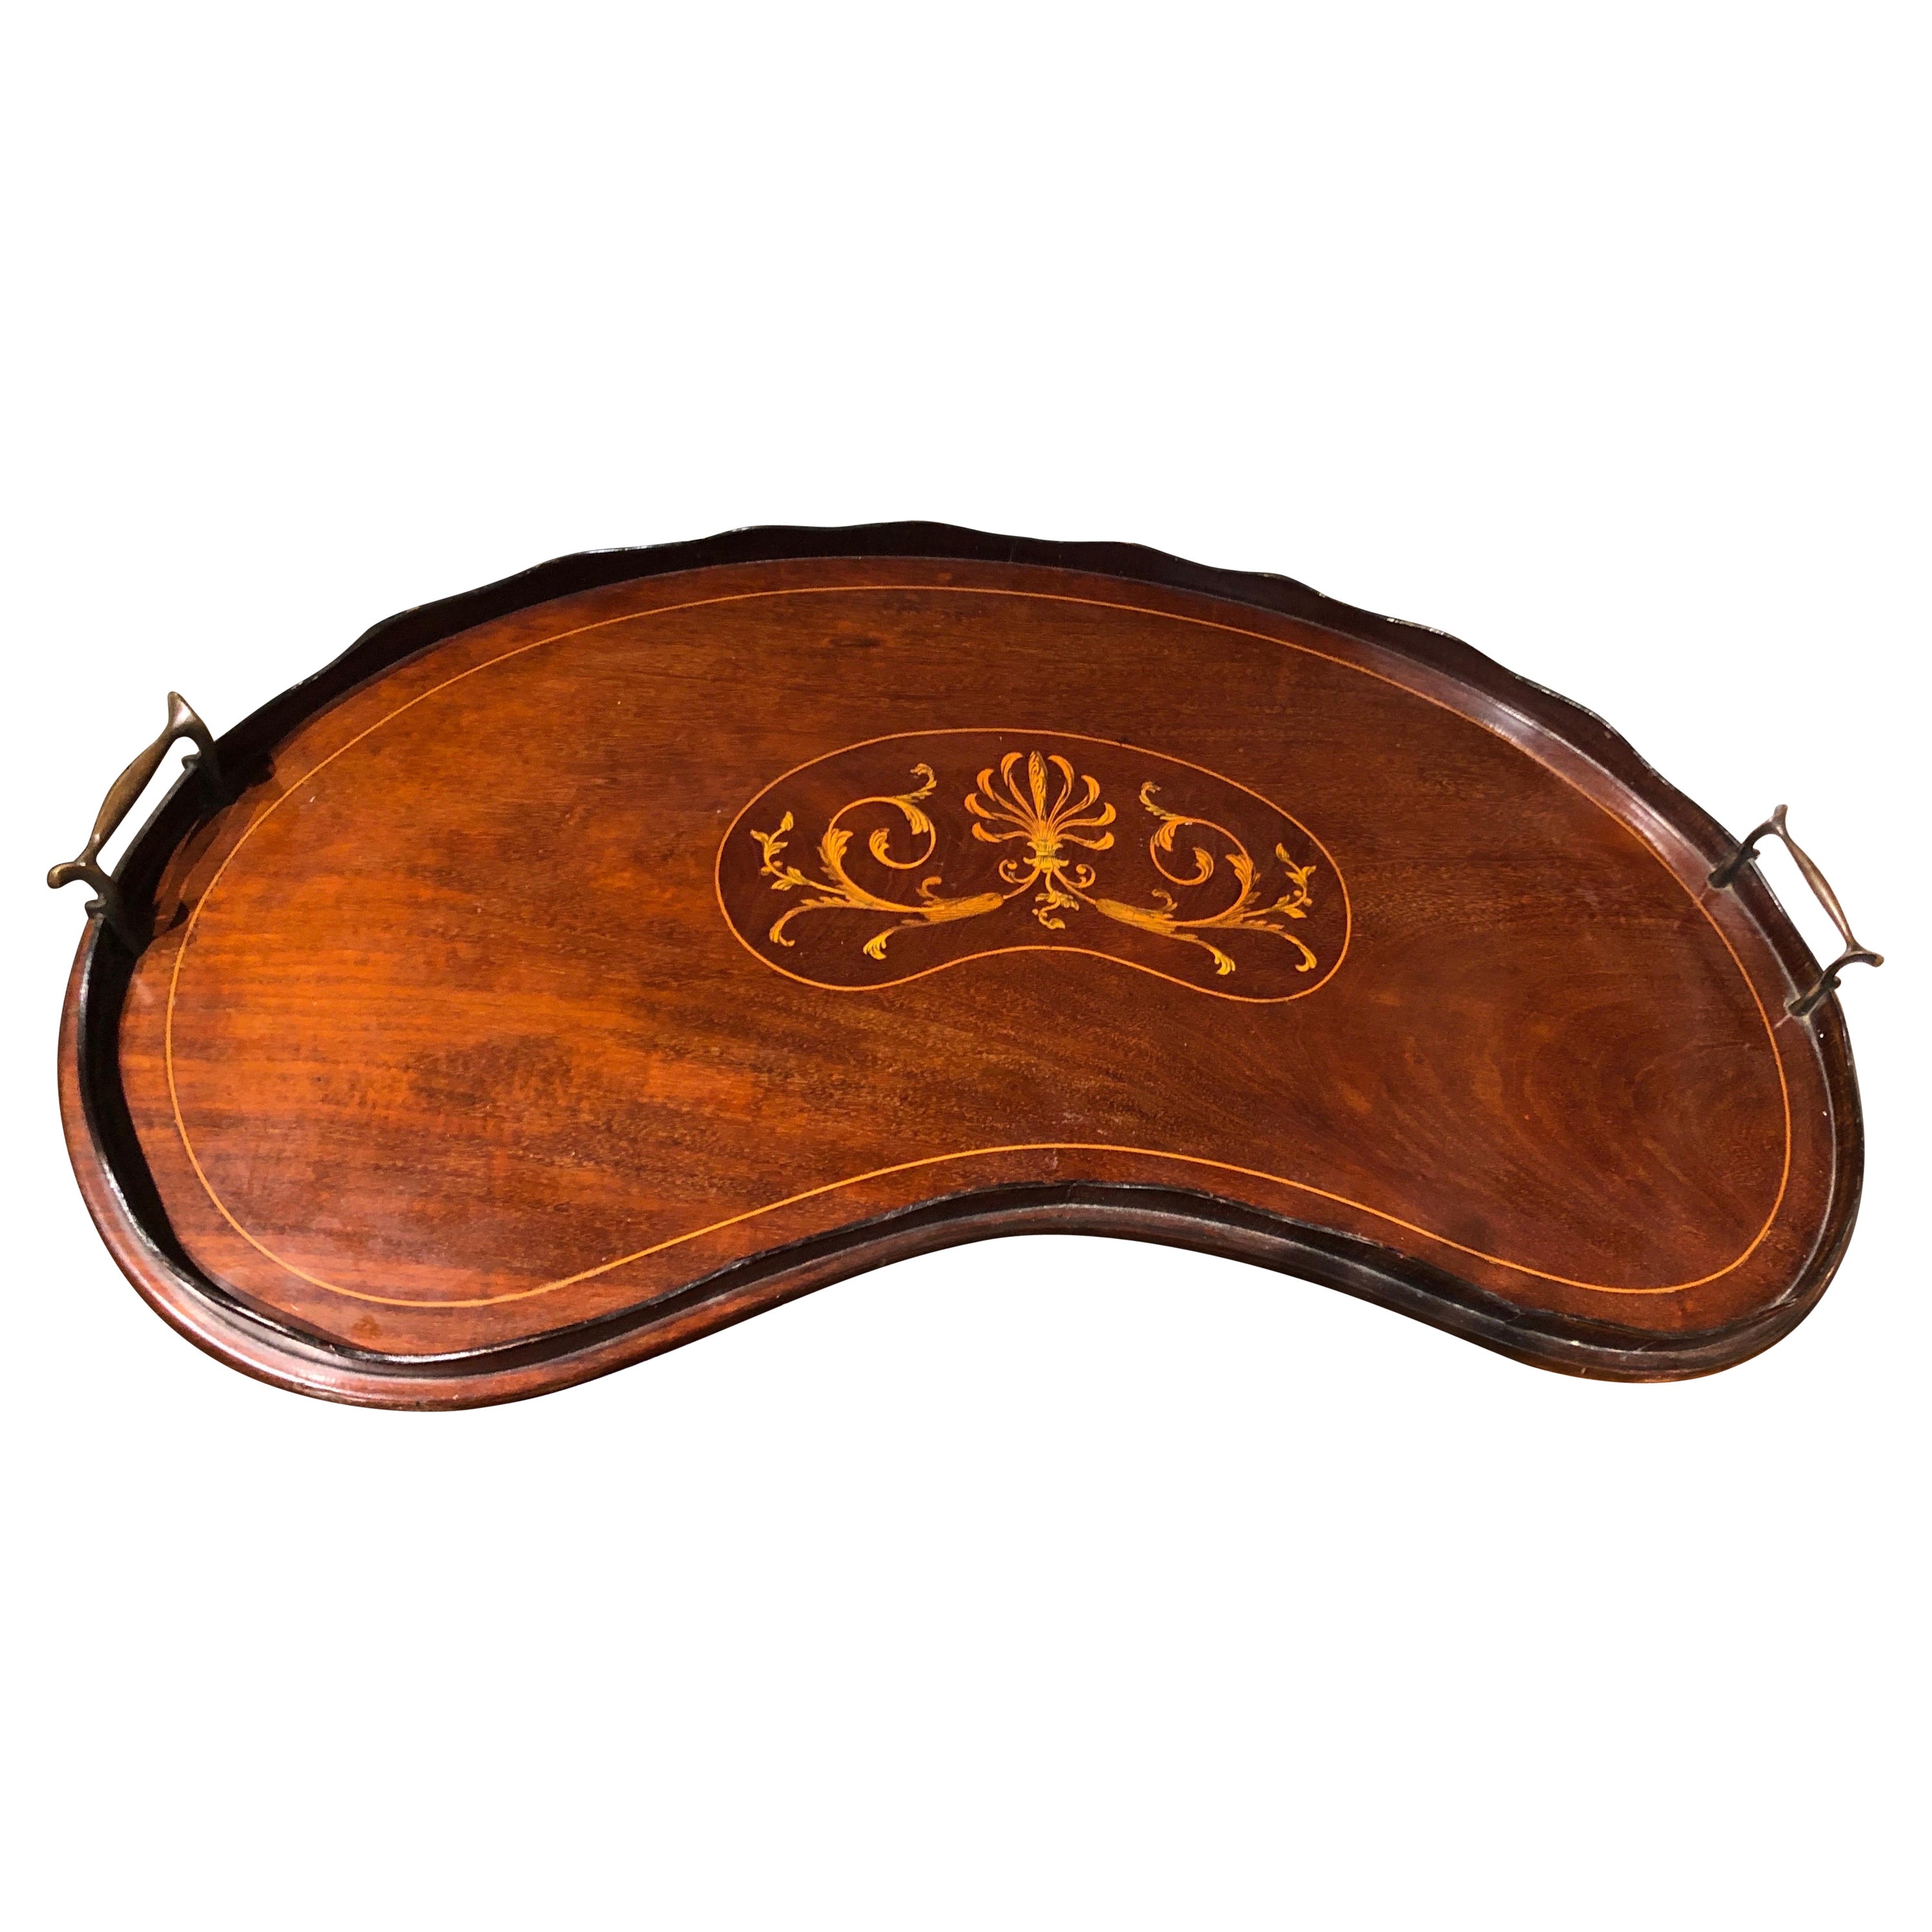 Superb Antique English Marquetry Inlaid Mahogany Kidney Shape Tray w/Handles For Sale